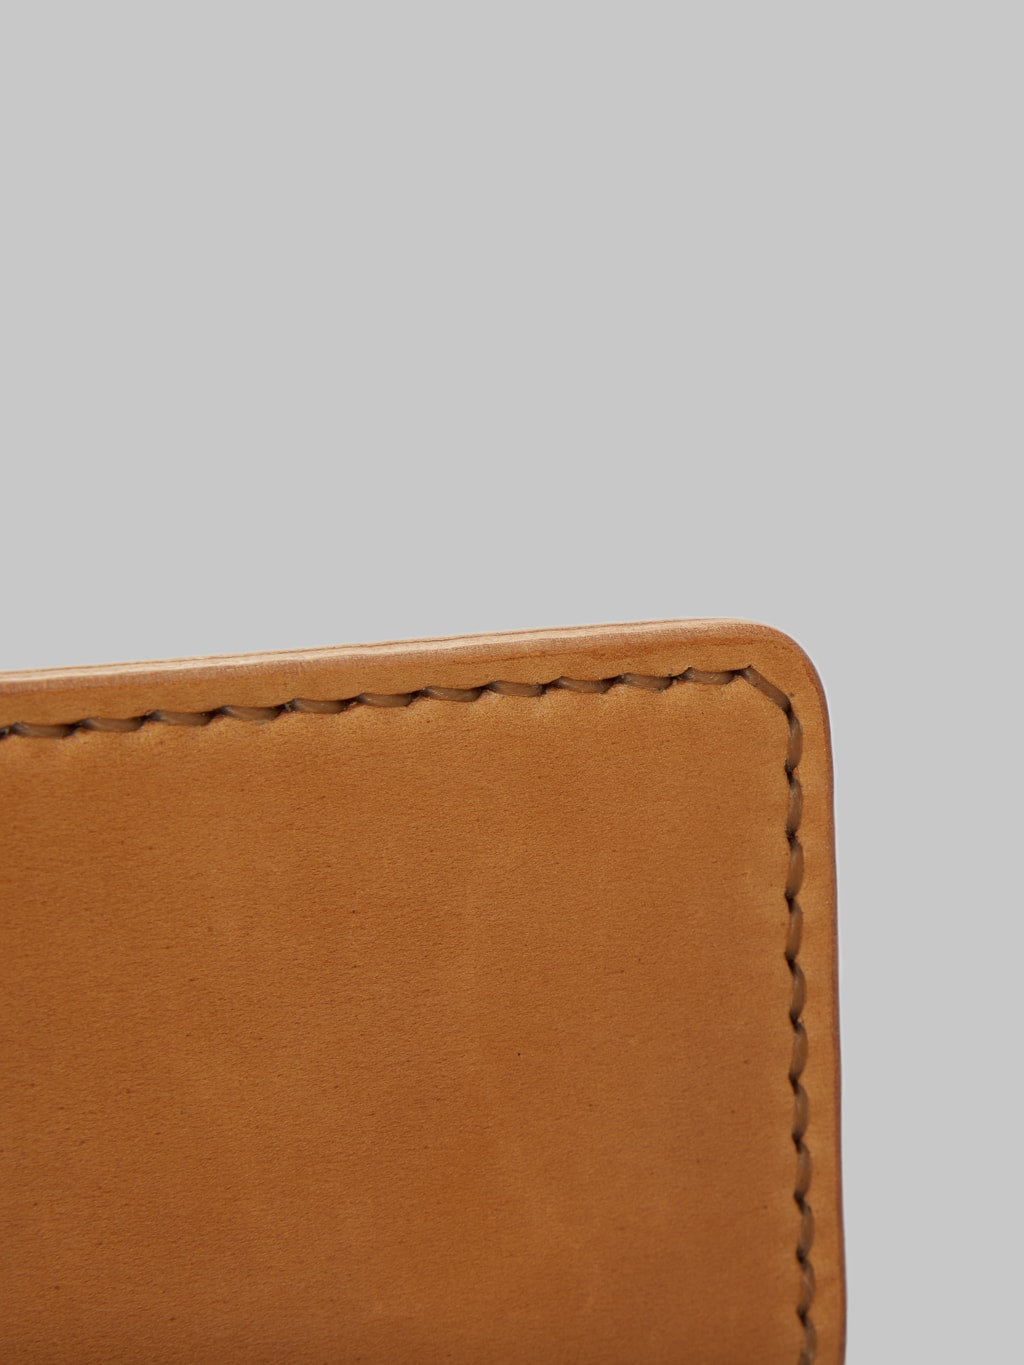 The Flat Head handsewn small cordovan card case camel stitching